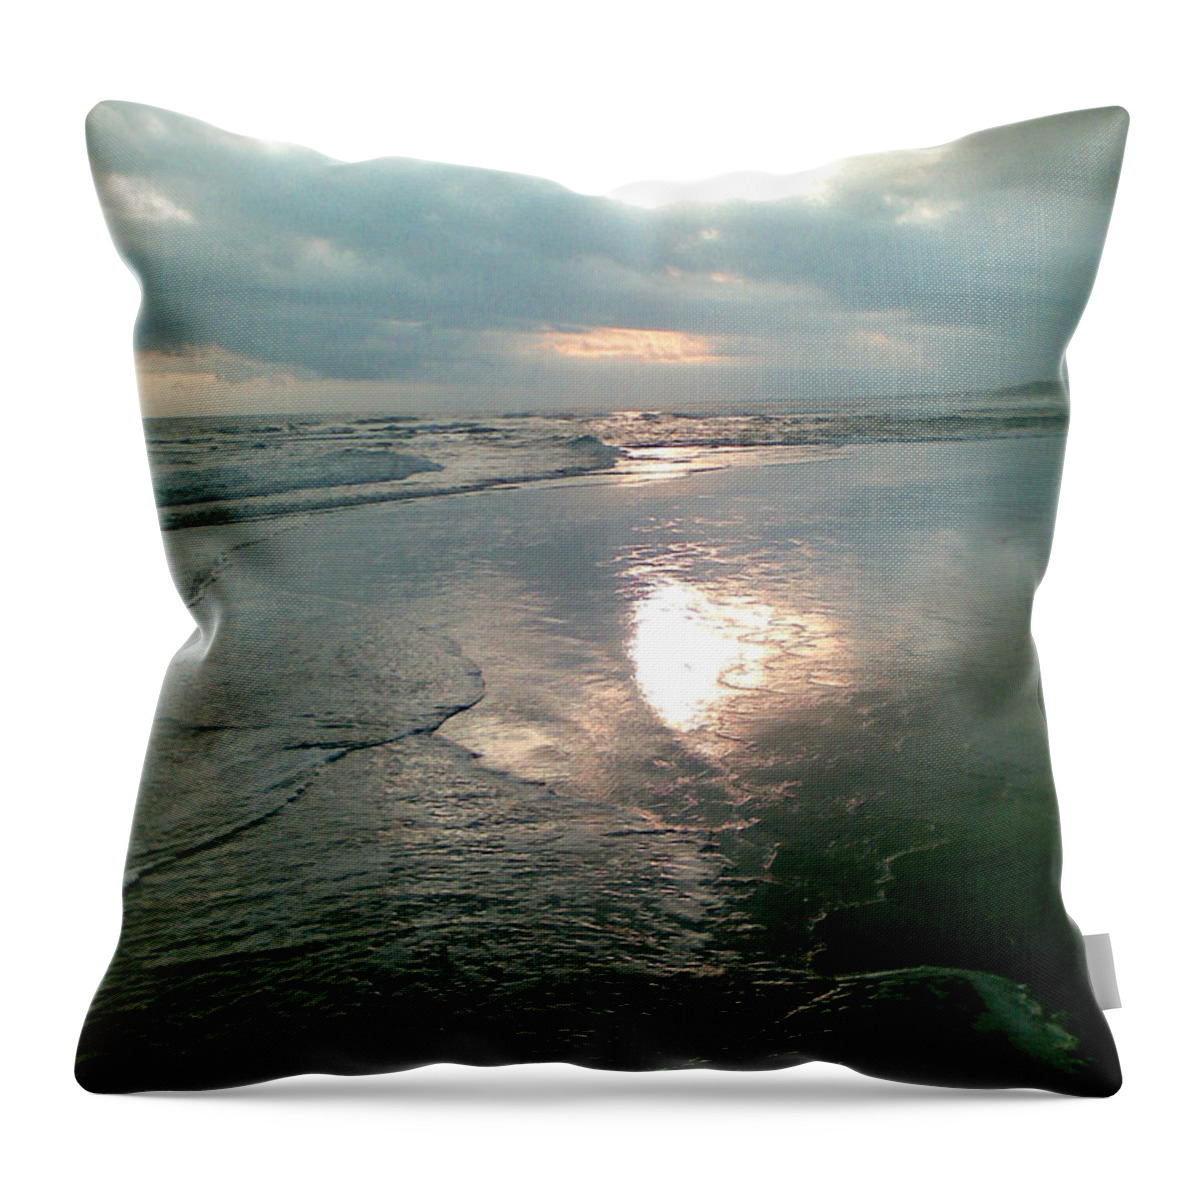 Bali Throw Pillow featuring the photograph Bali Dusk by Mark Sellers